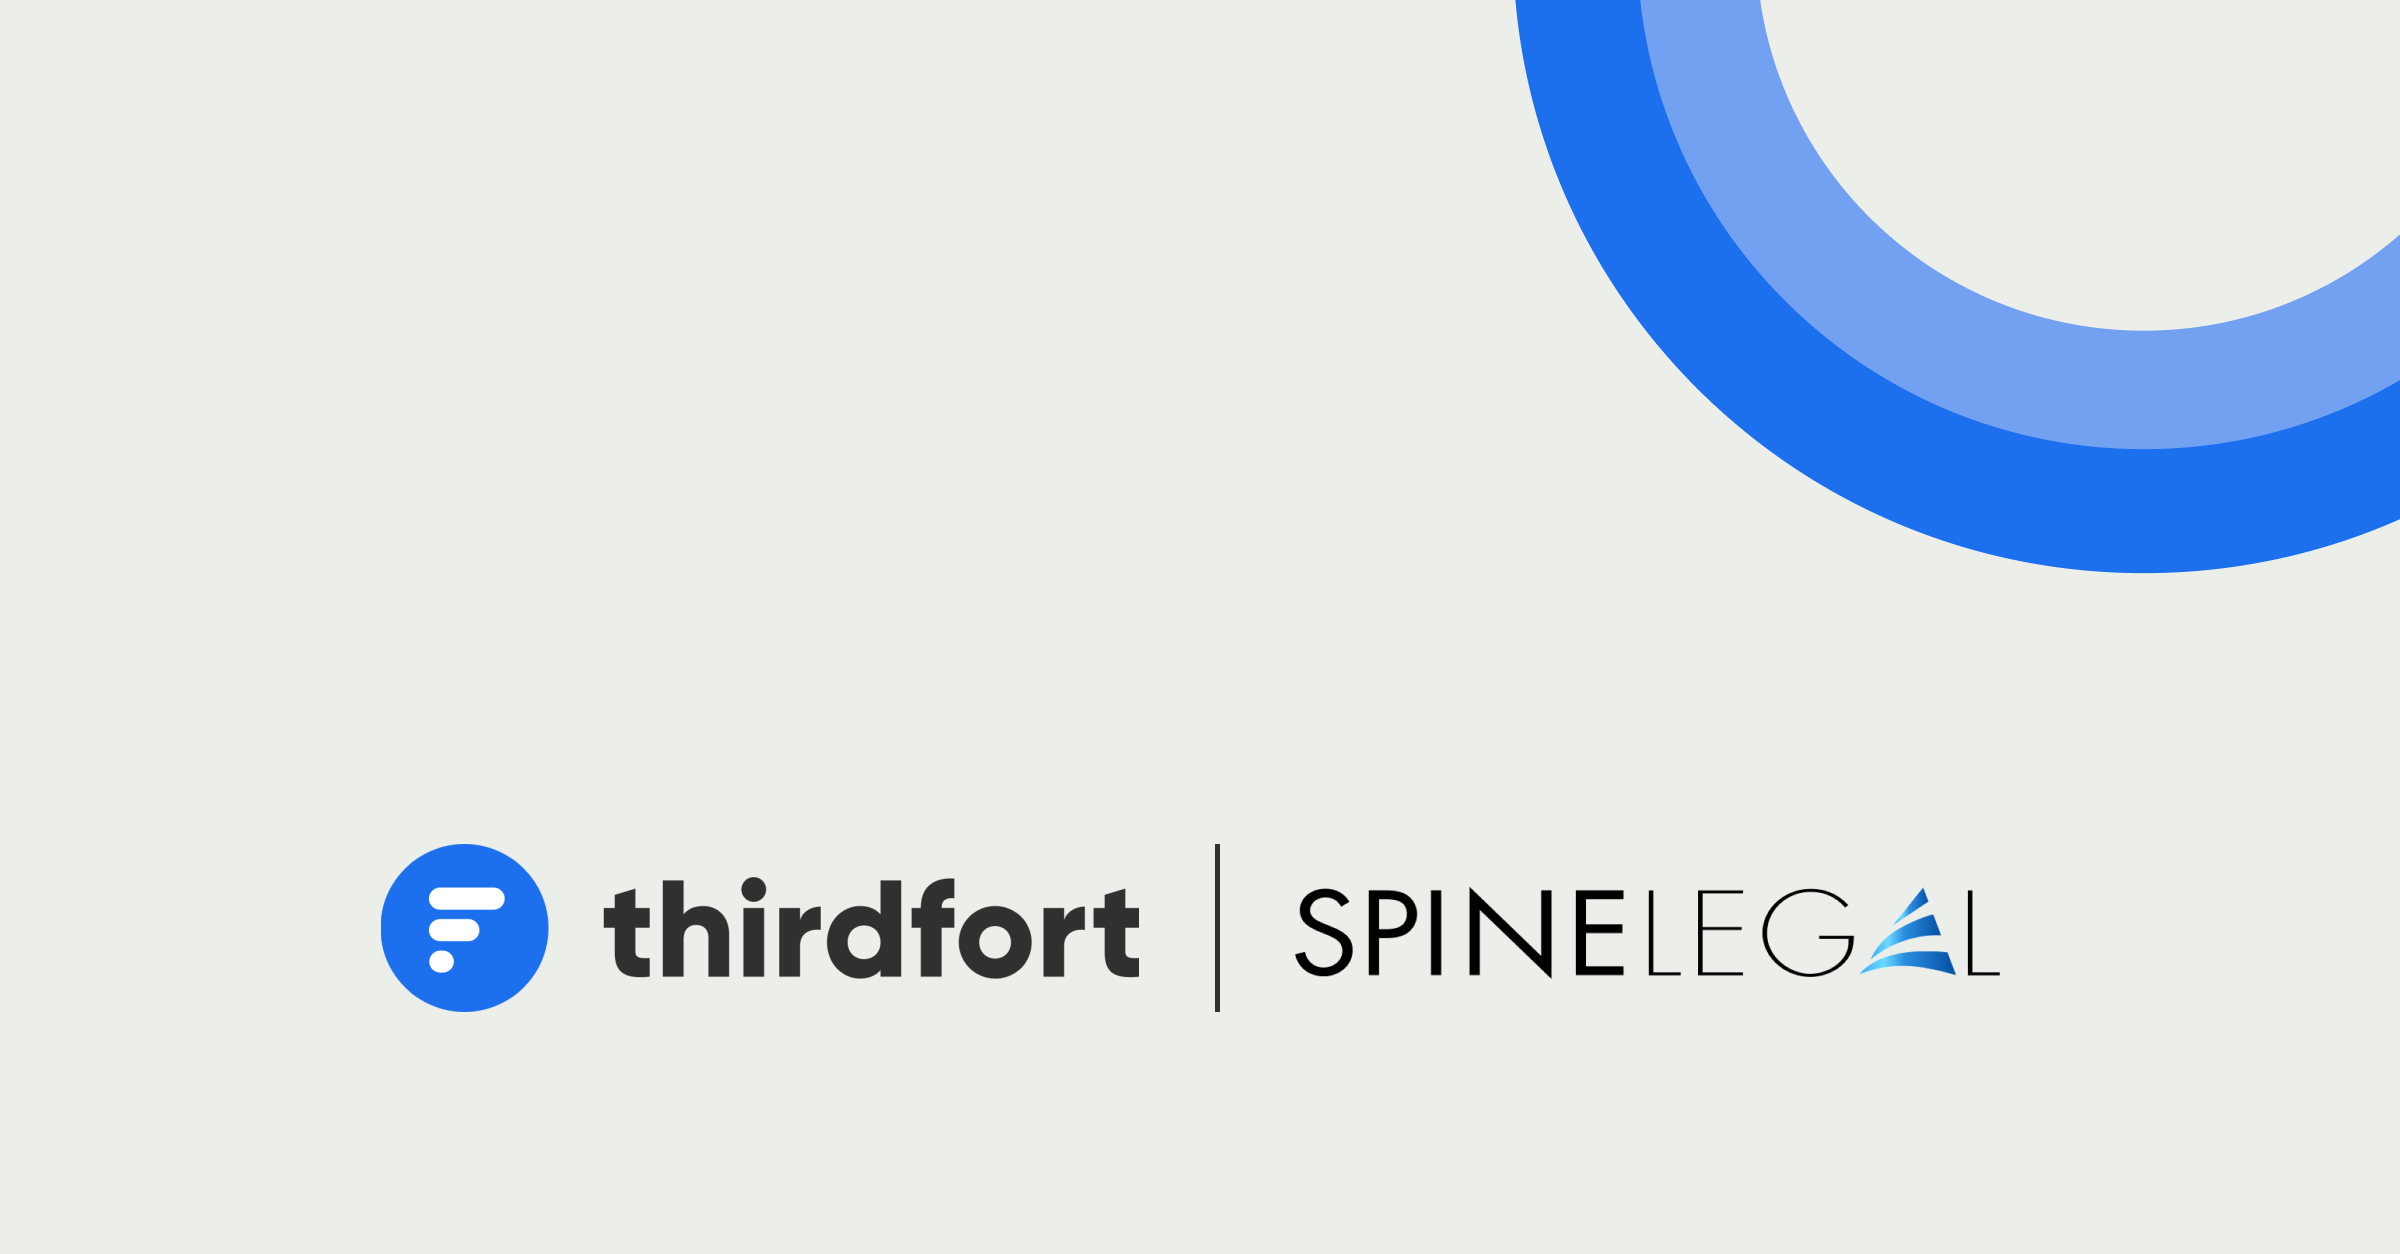 Thirdfort logo and Spine Legal logo on a grey background with a blue graphic